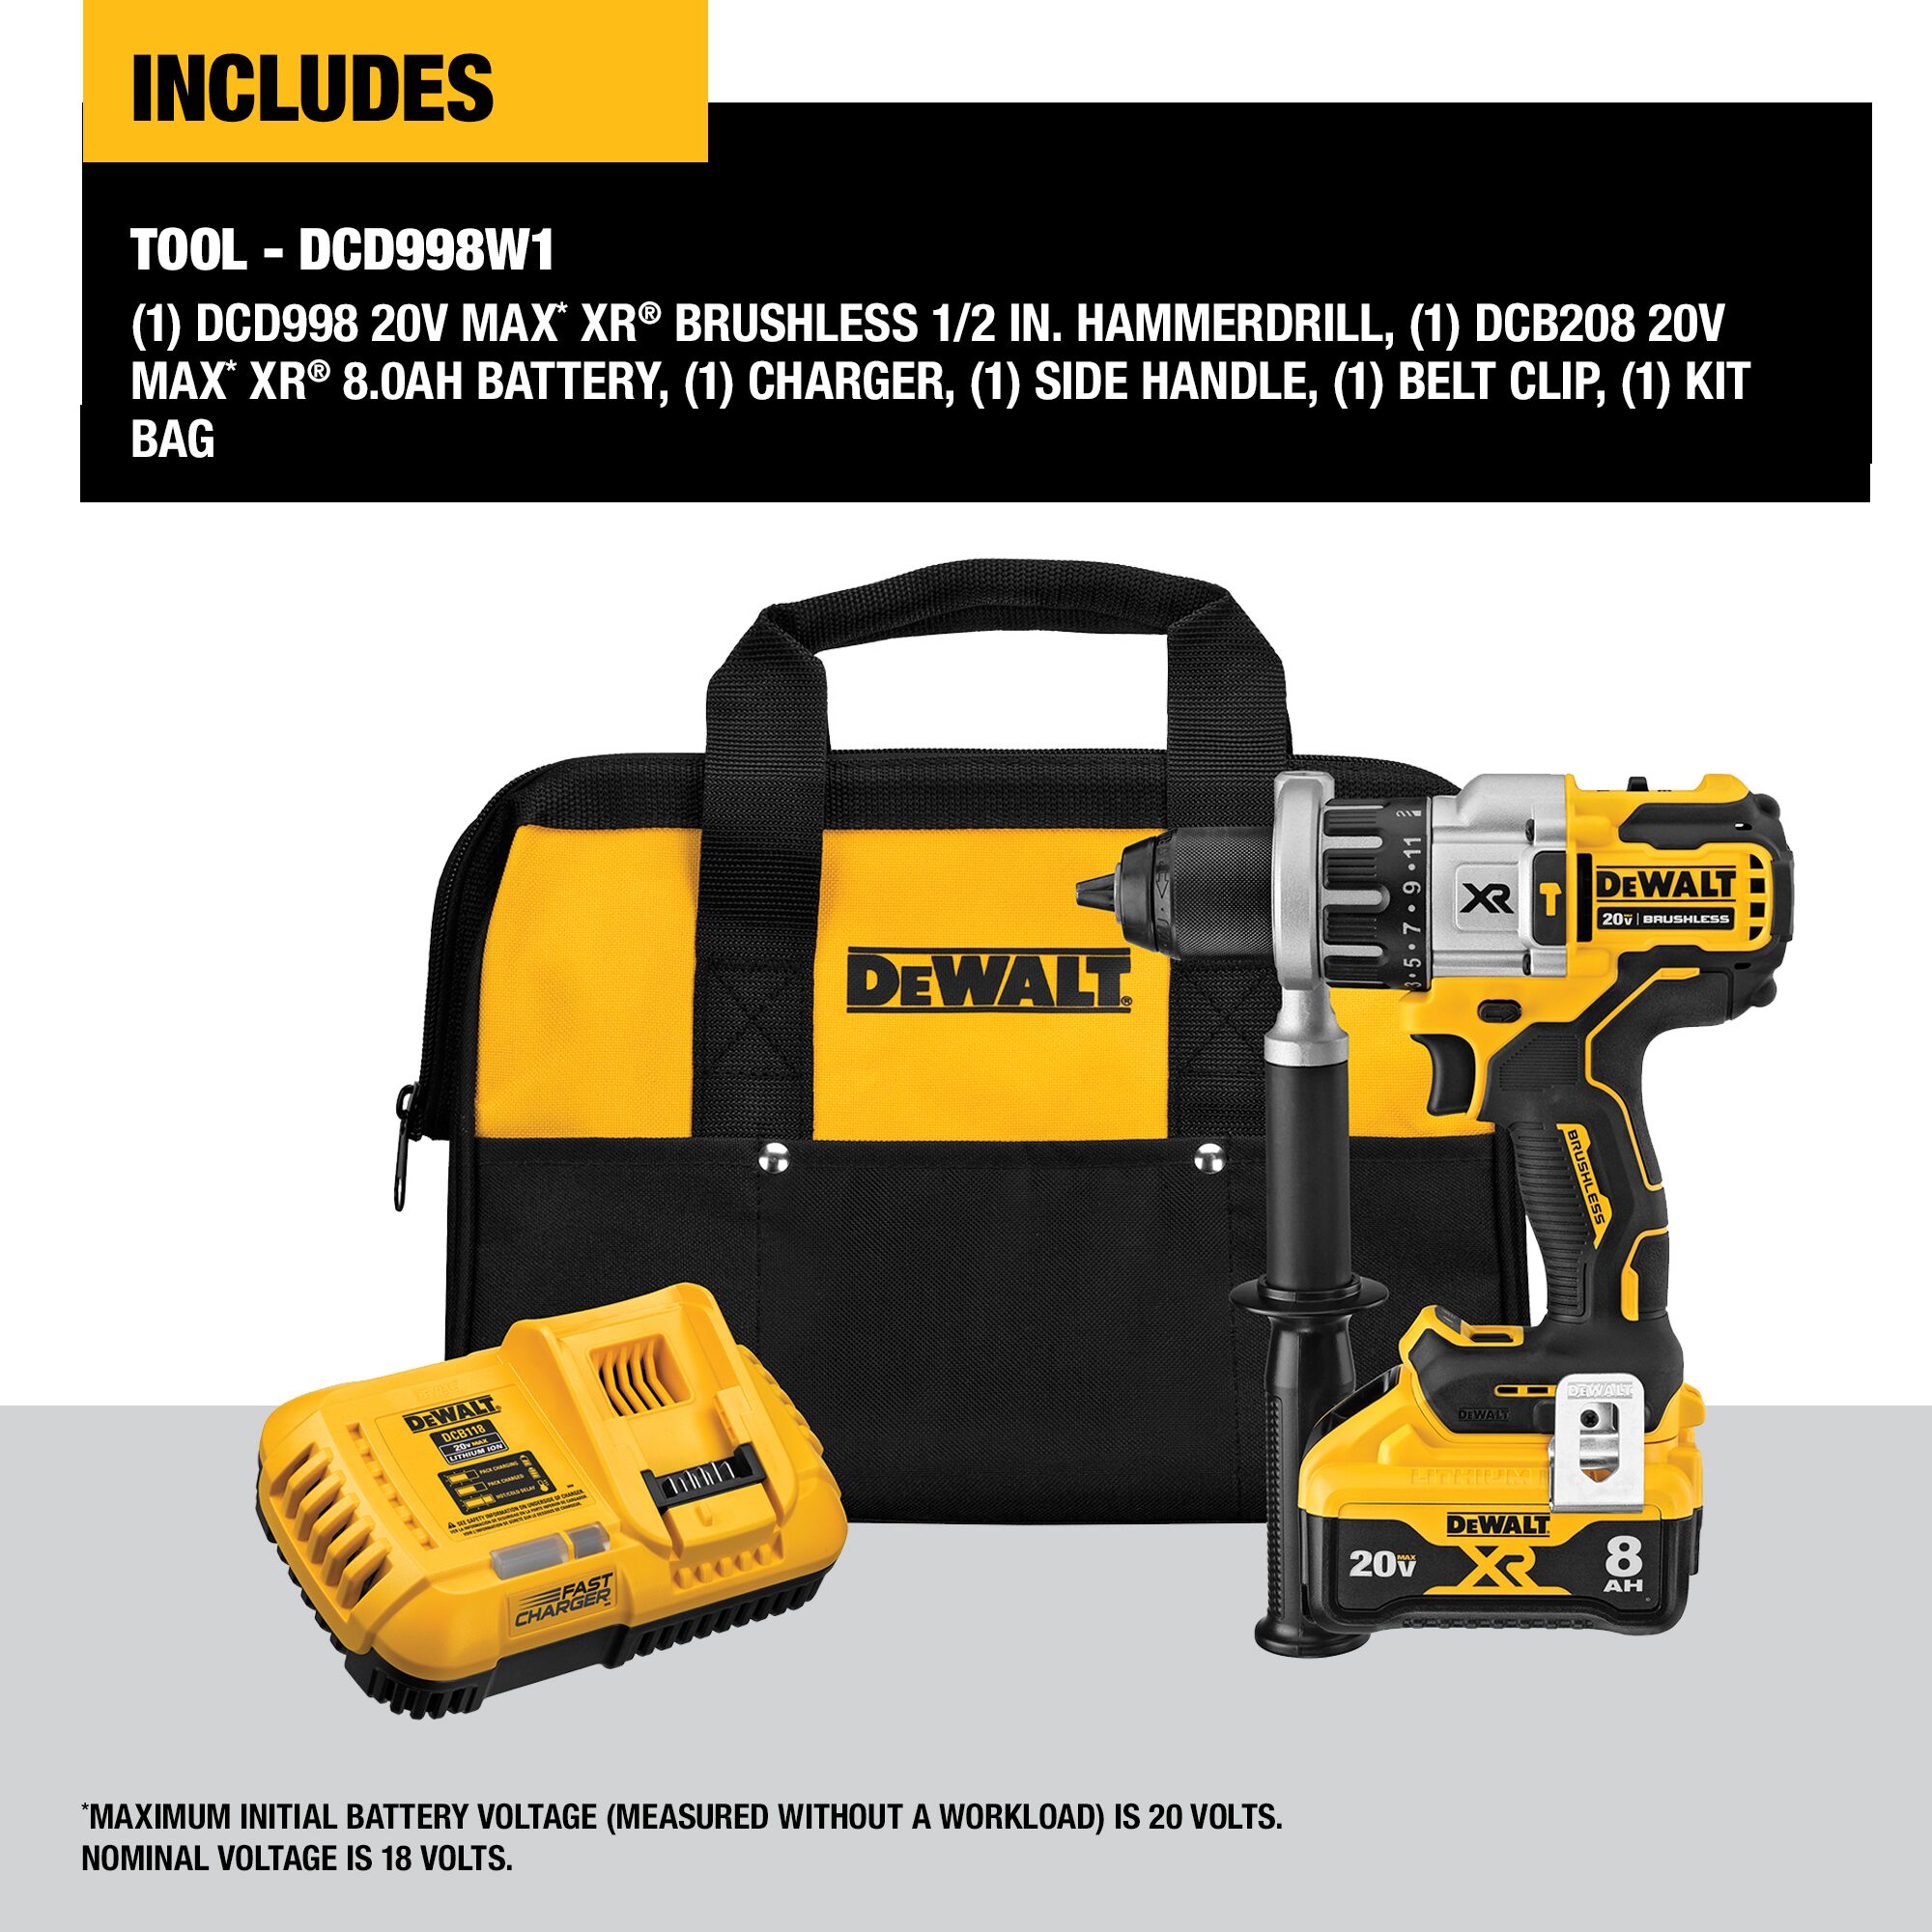 DEWALT 18-volt 1/2-in Cordless Drill (2-Batteries Included